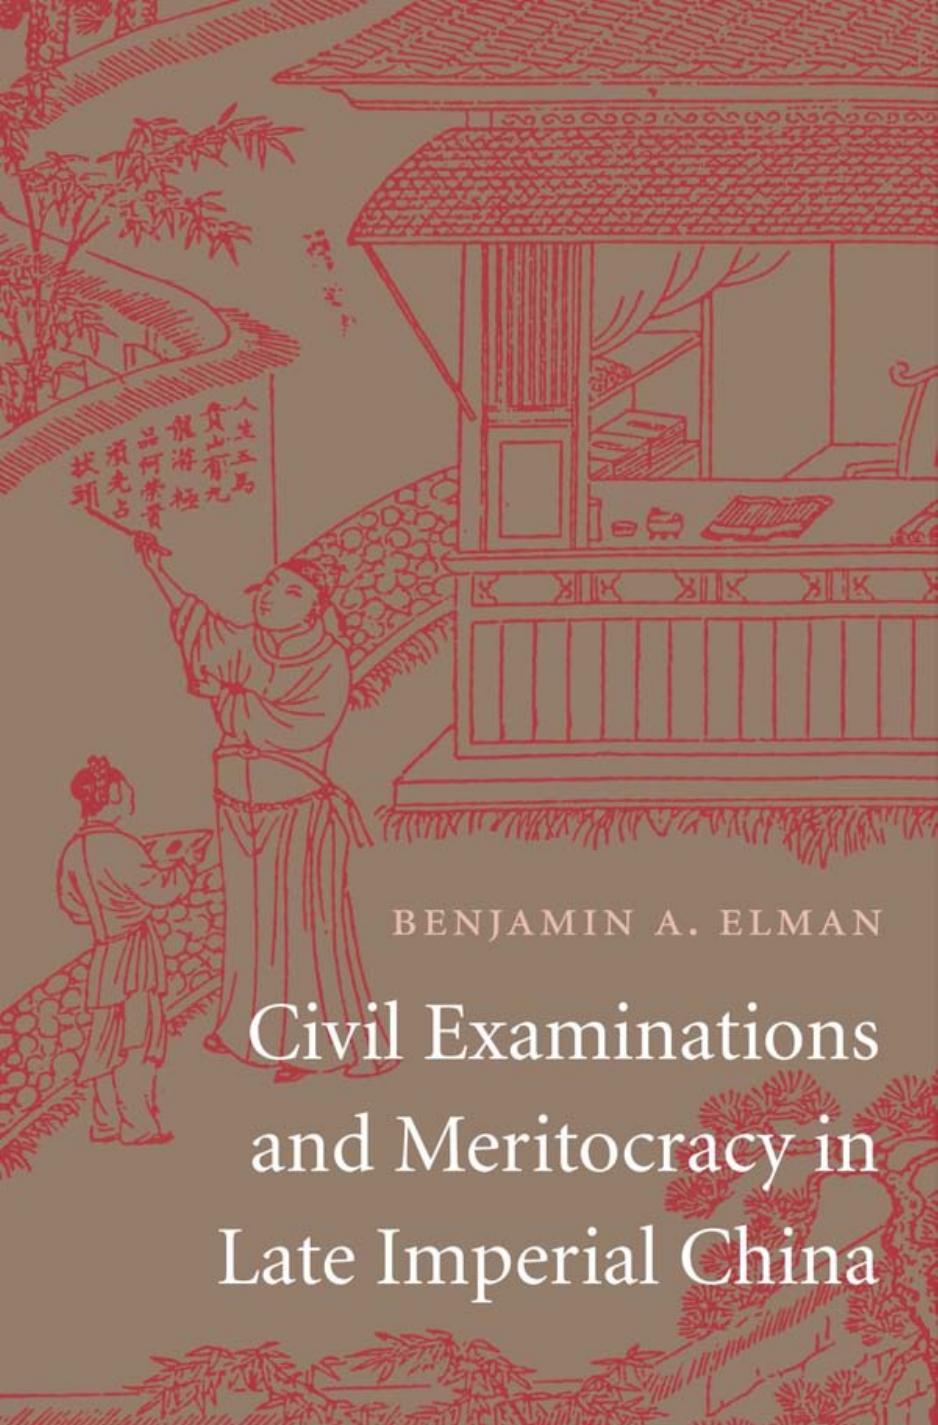 Civil Examinations and Meritocracy in Late Imperial China.jpg